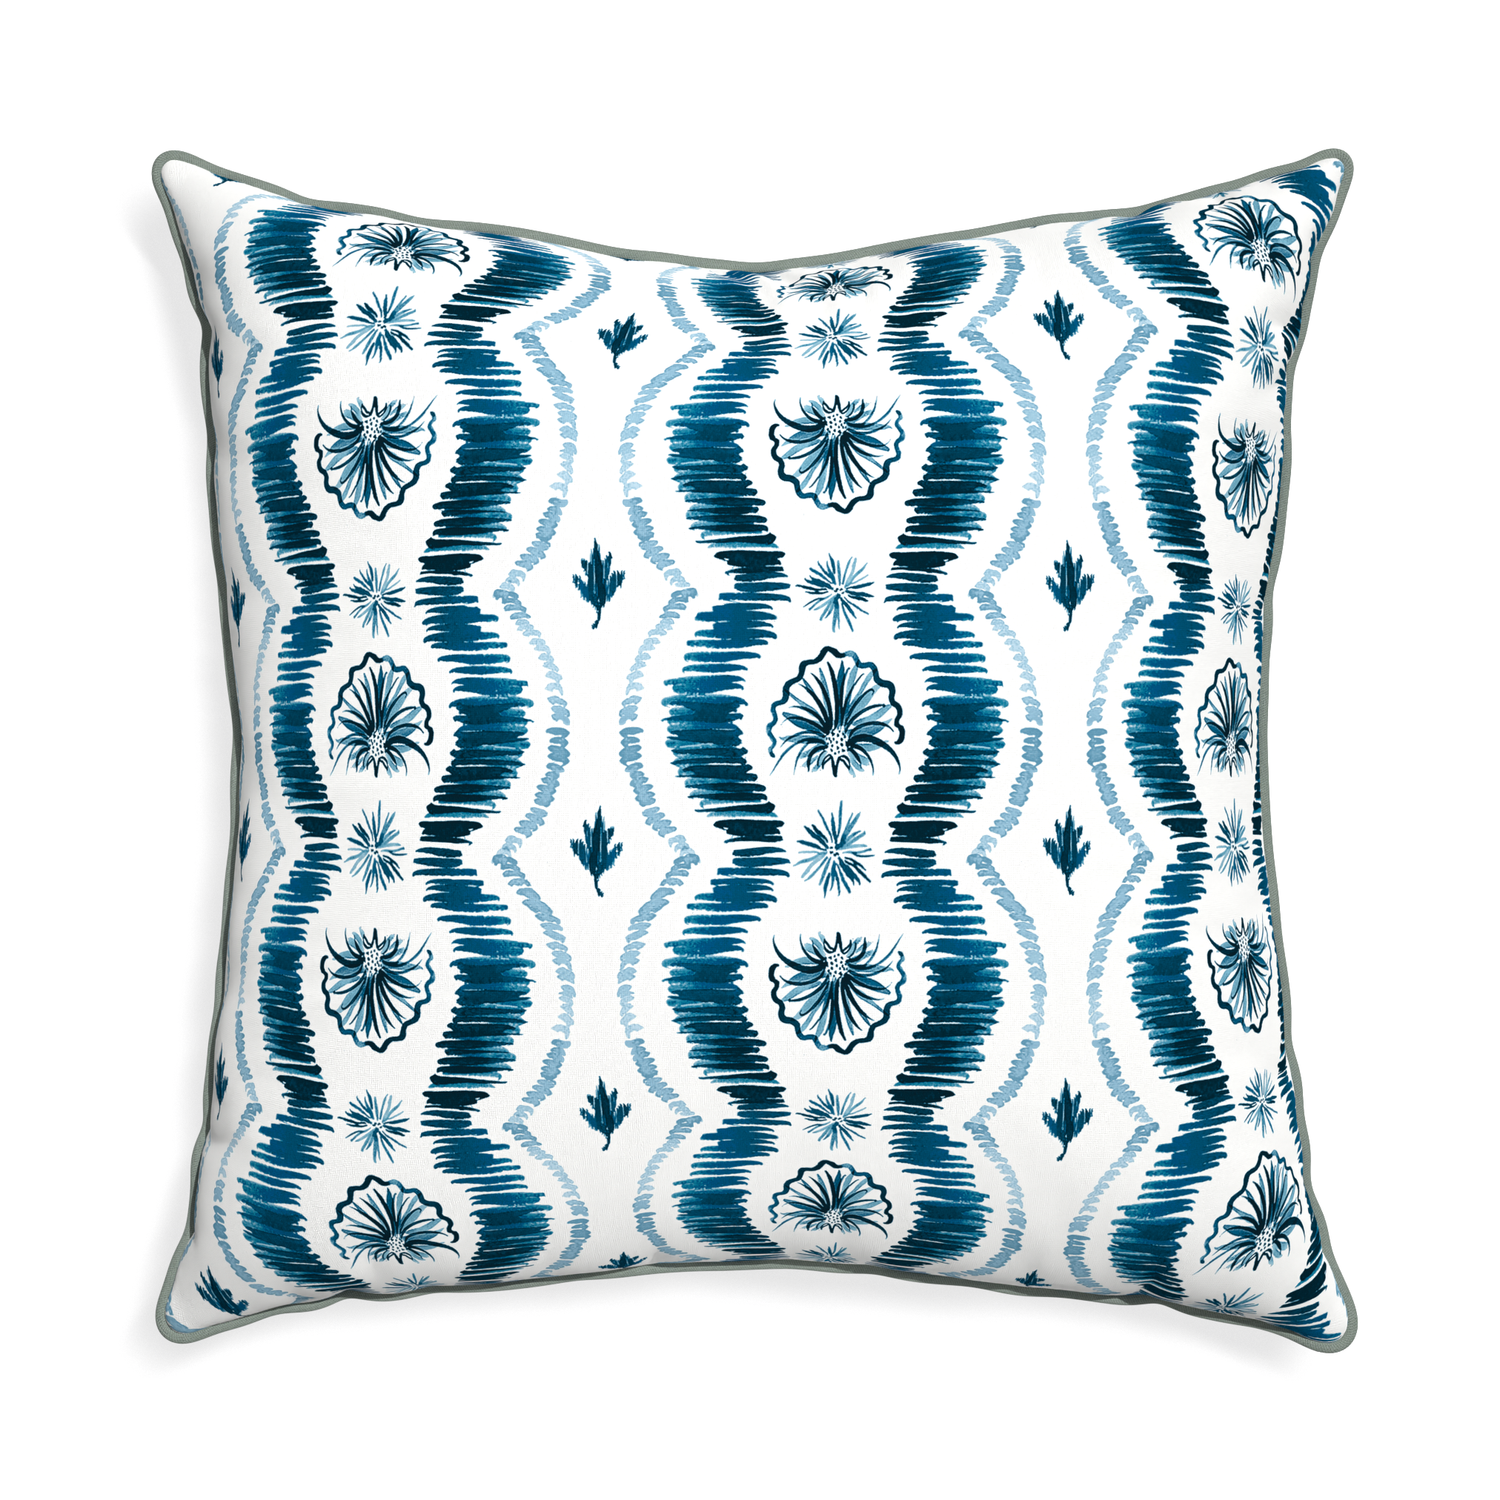 Euro-sham alice custom blue ikatpillow with sage piping on white background